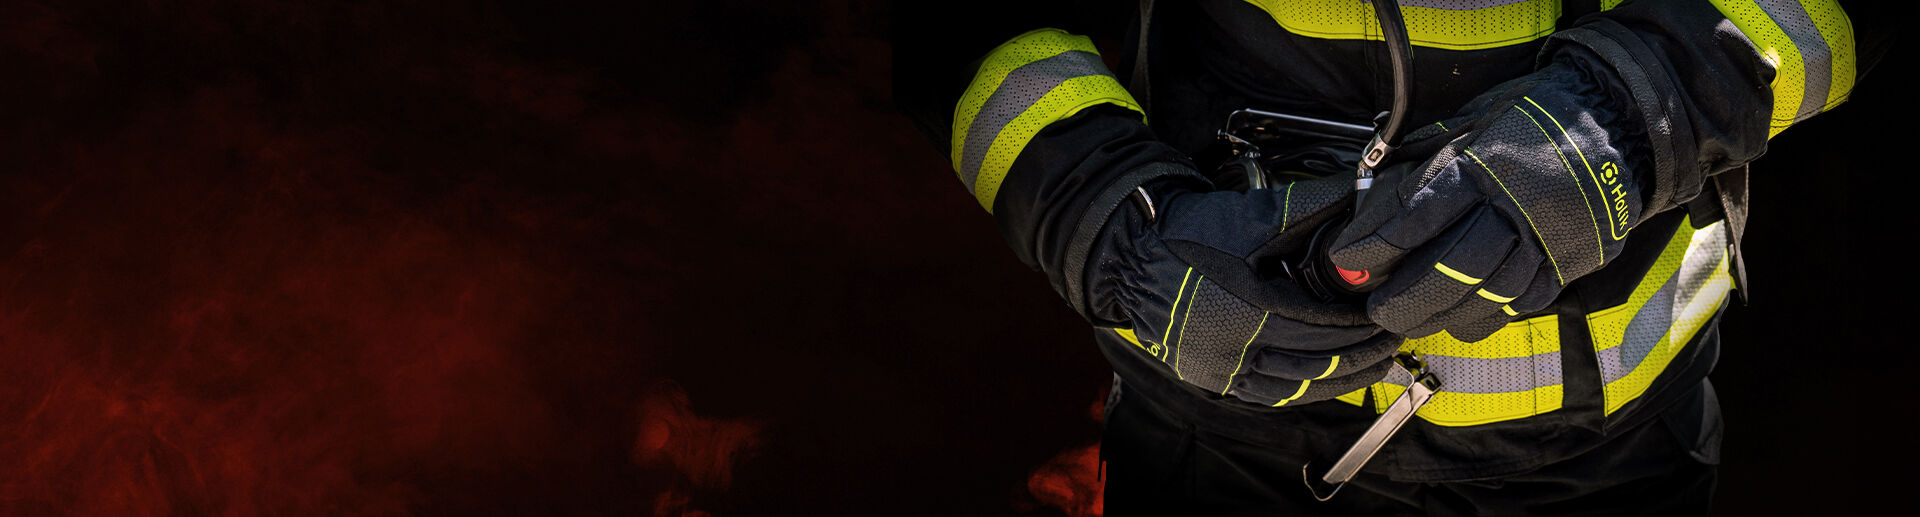 Protective gloves for firefighters